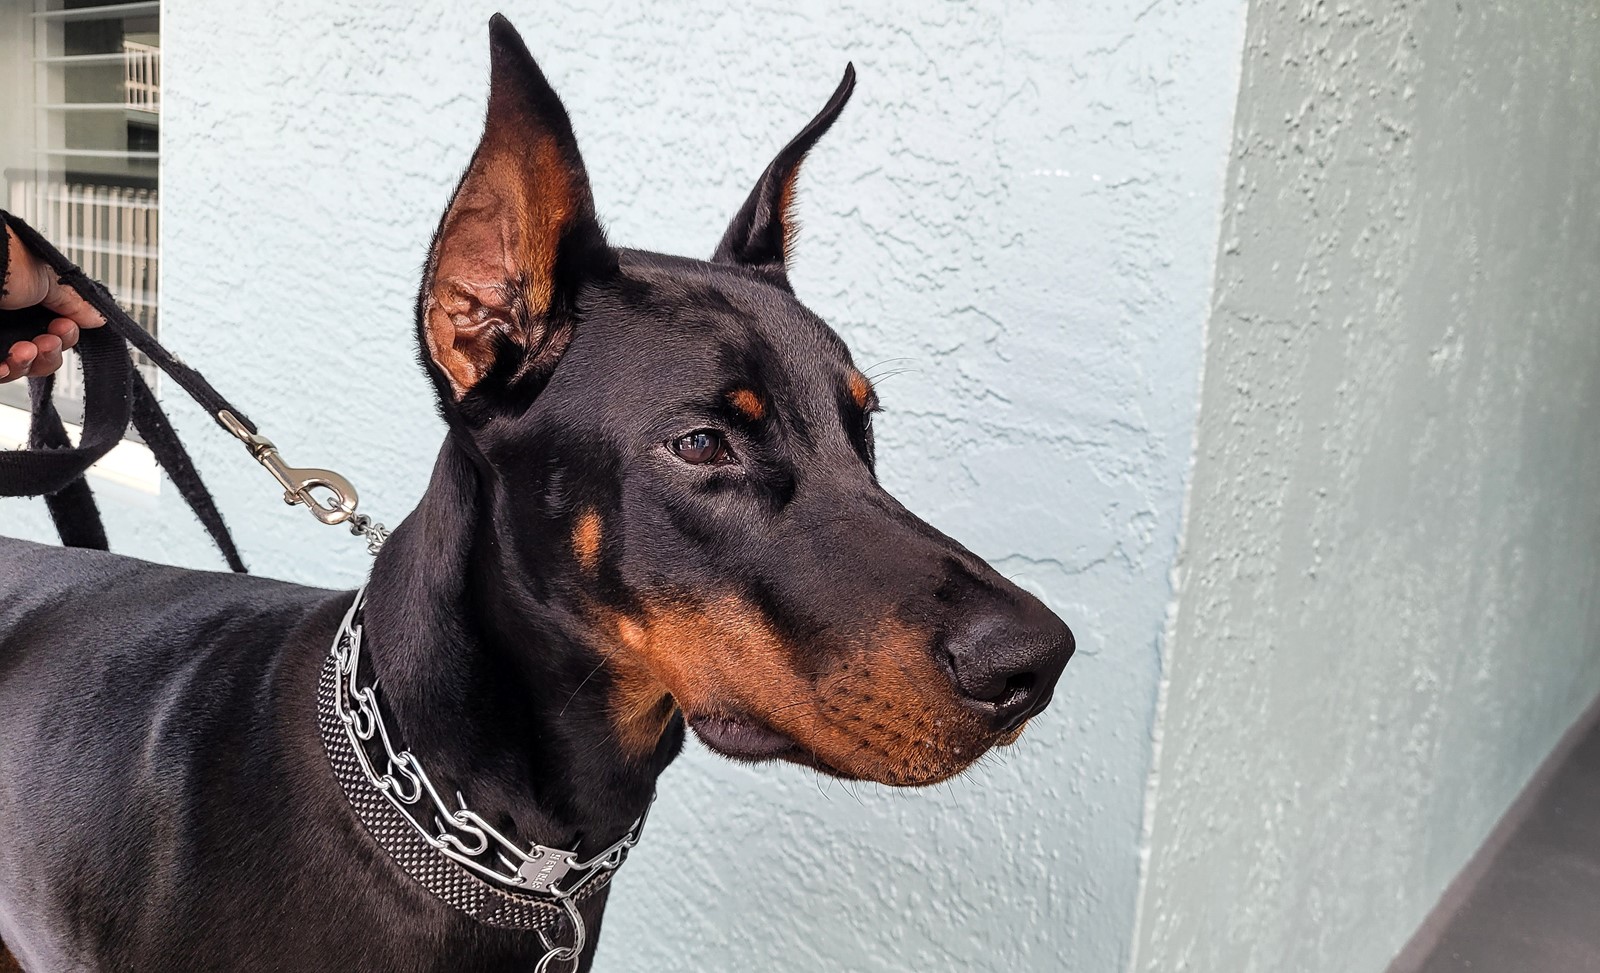 Doberman puppy needs basic training for dog owner to control his big body